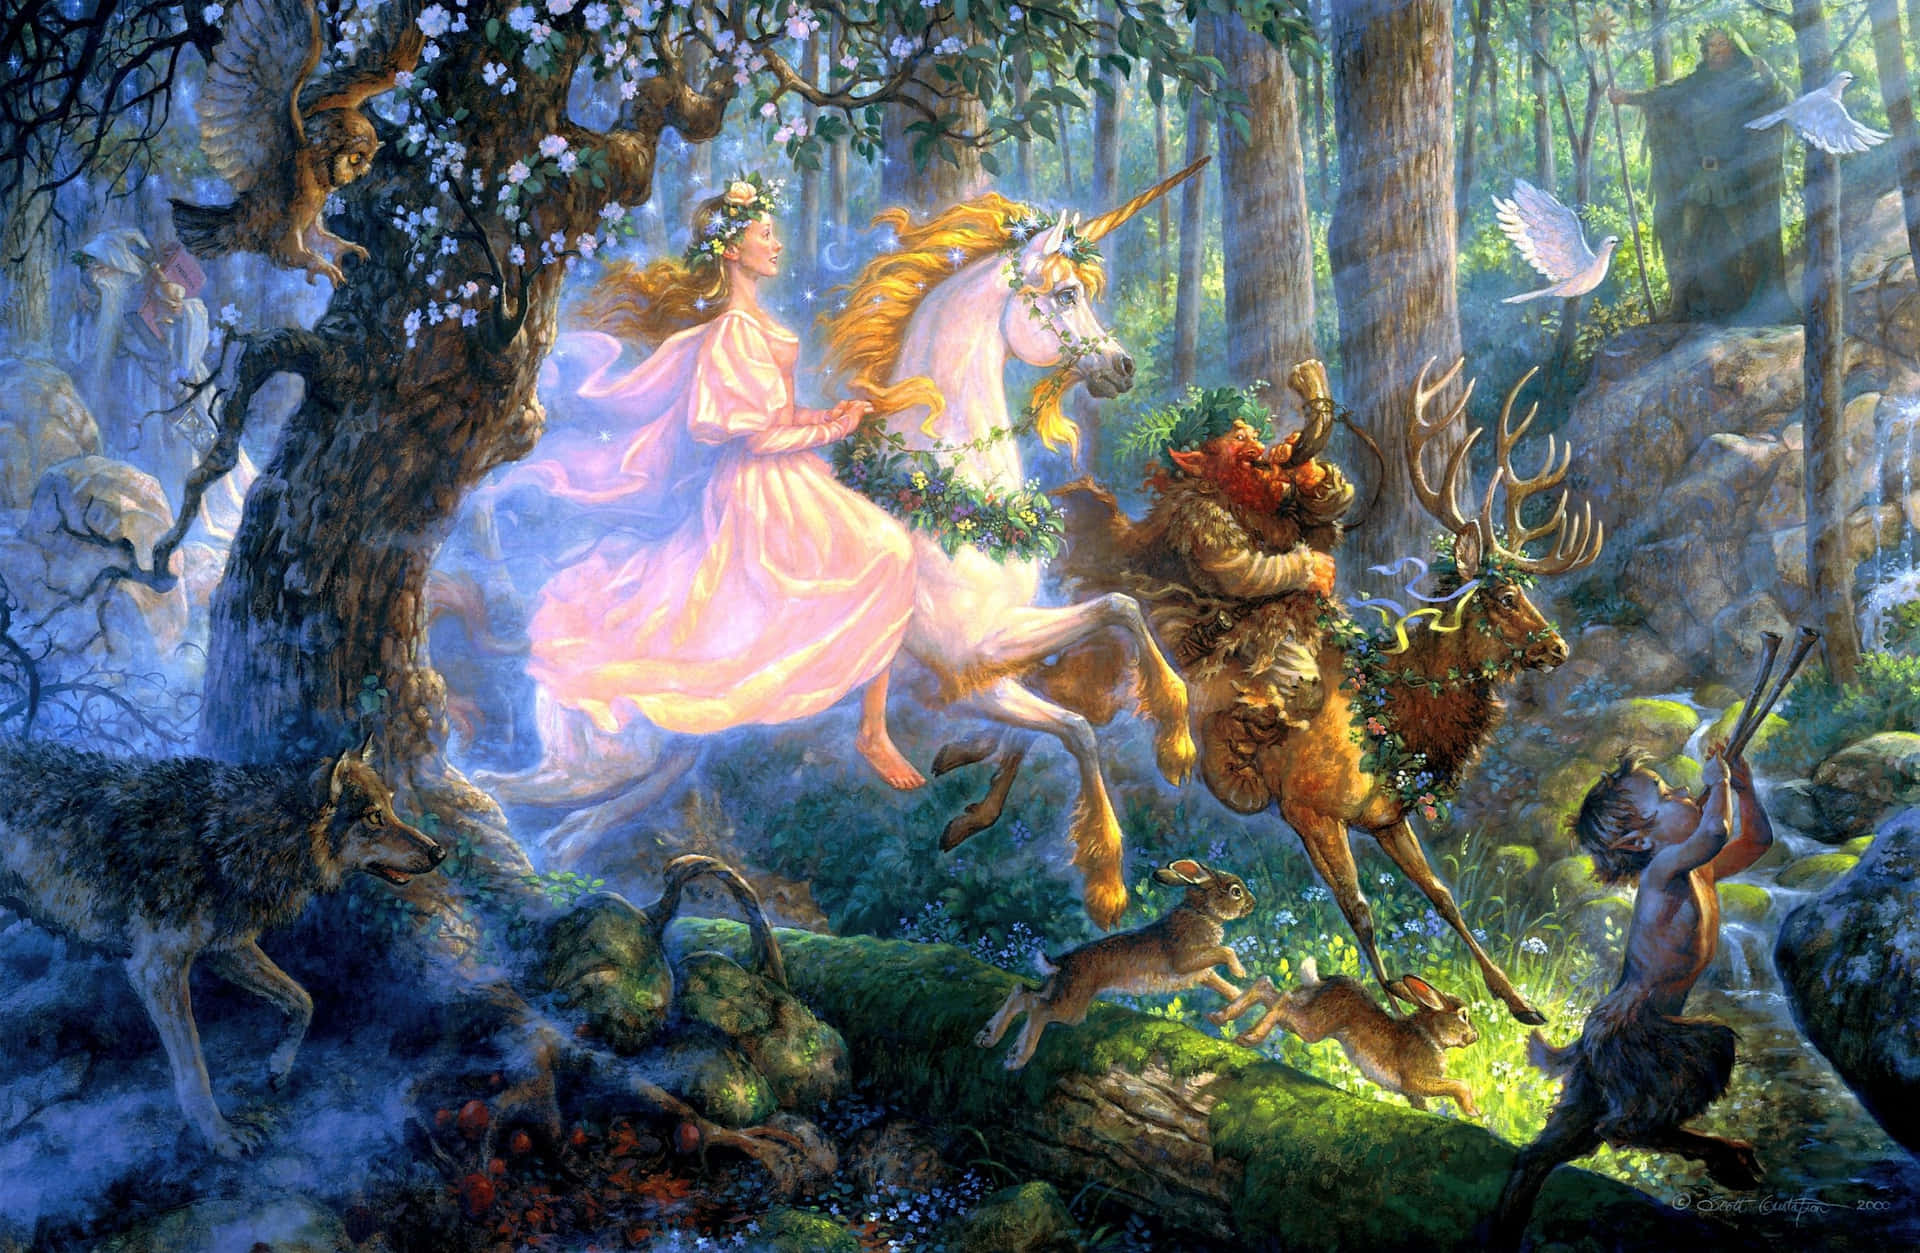 A Painting Of A Unicorn Riding Through The Forest